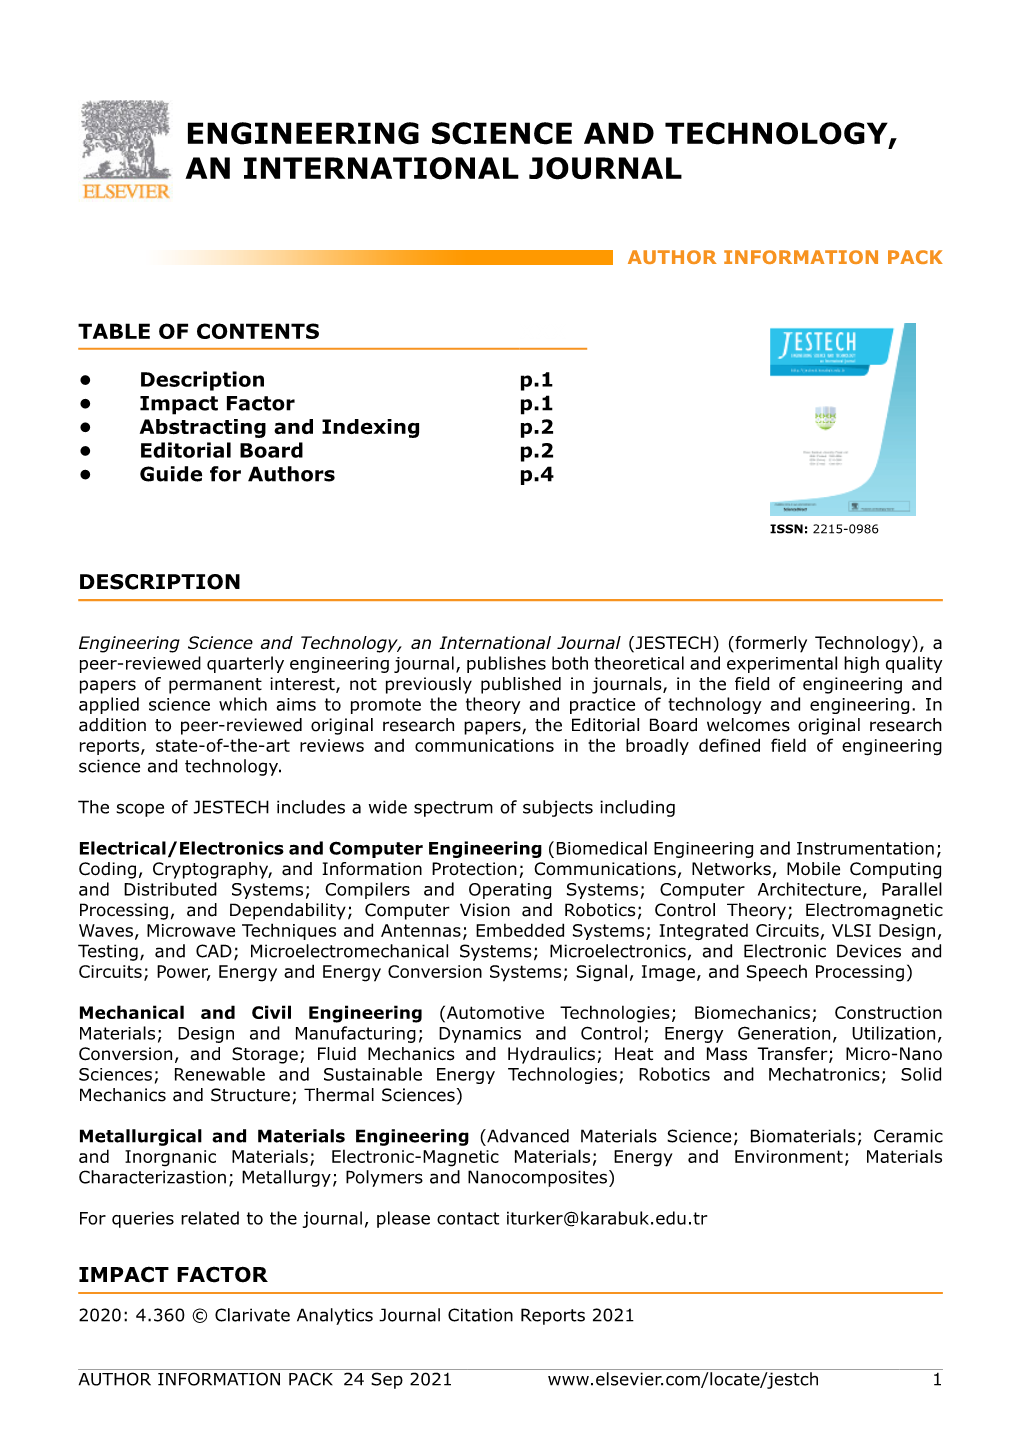 Engineering Science and Technology, an International Journal